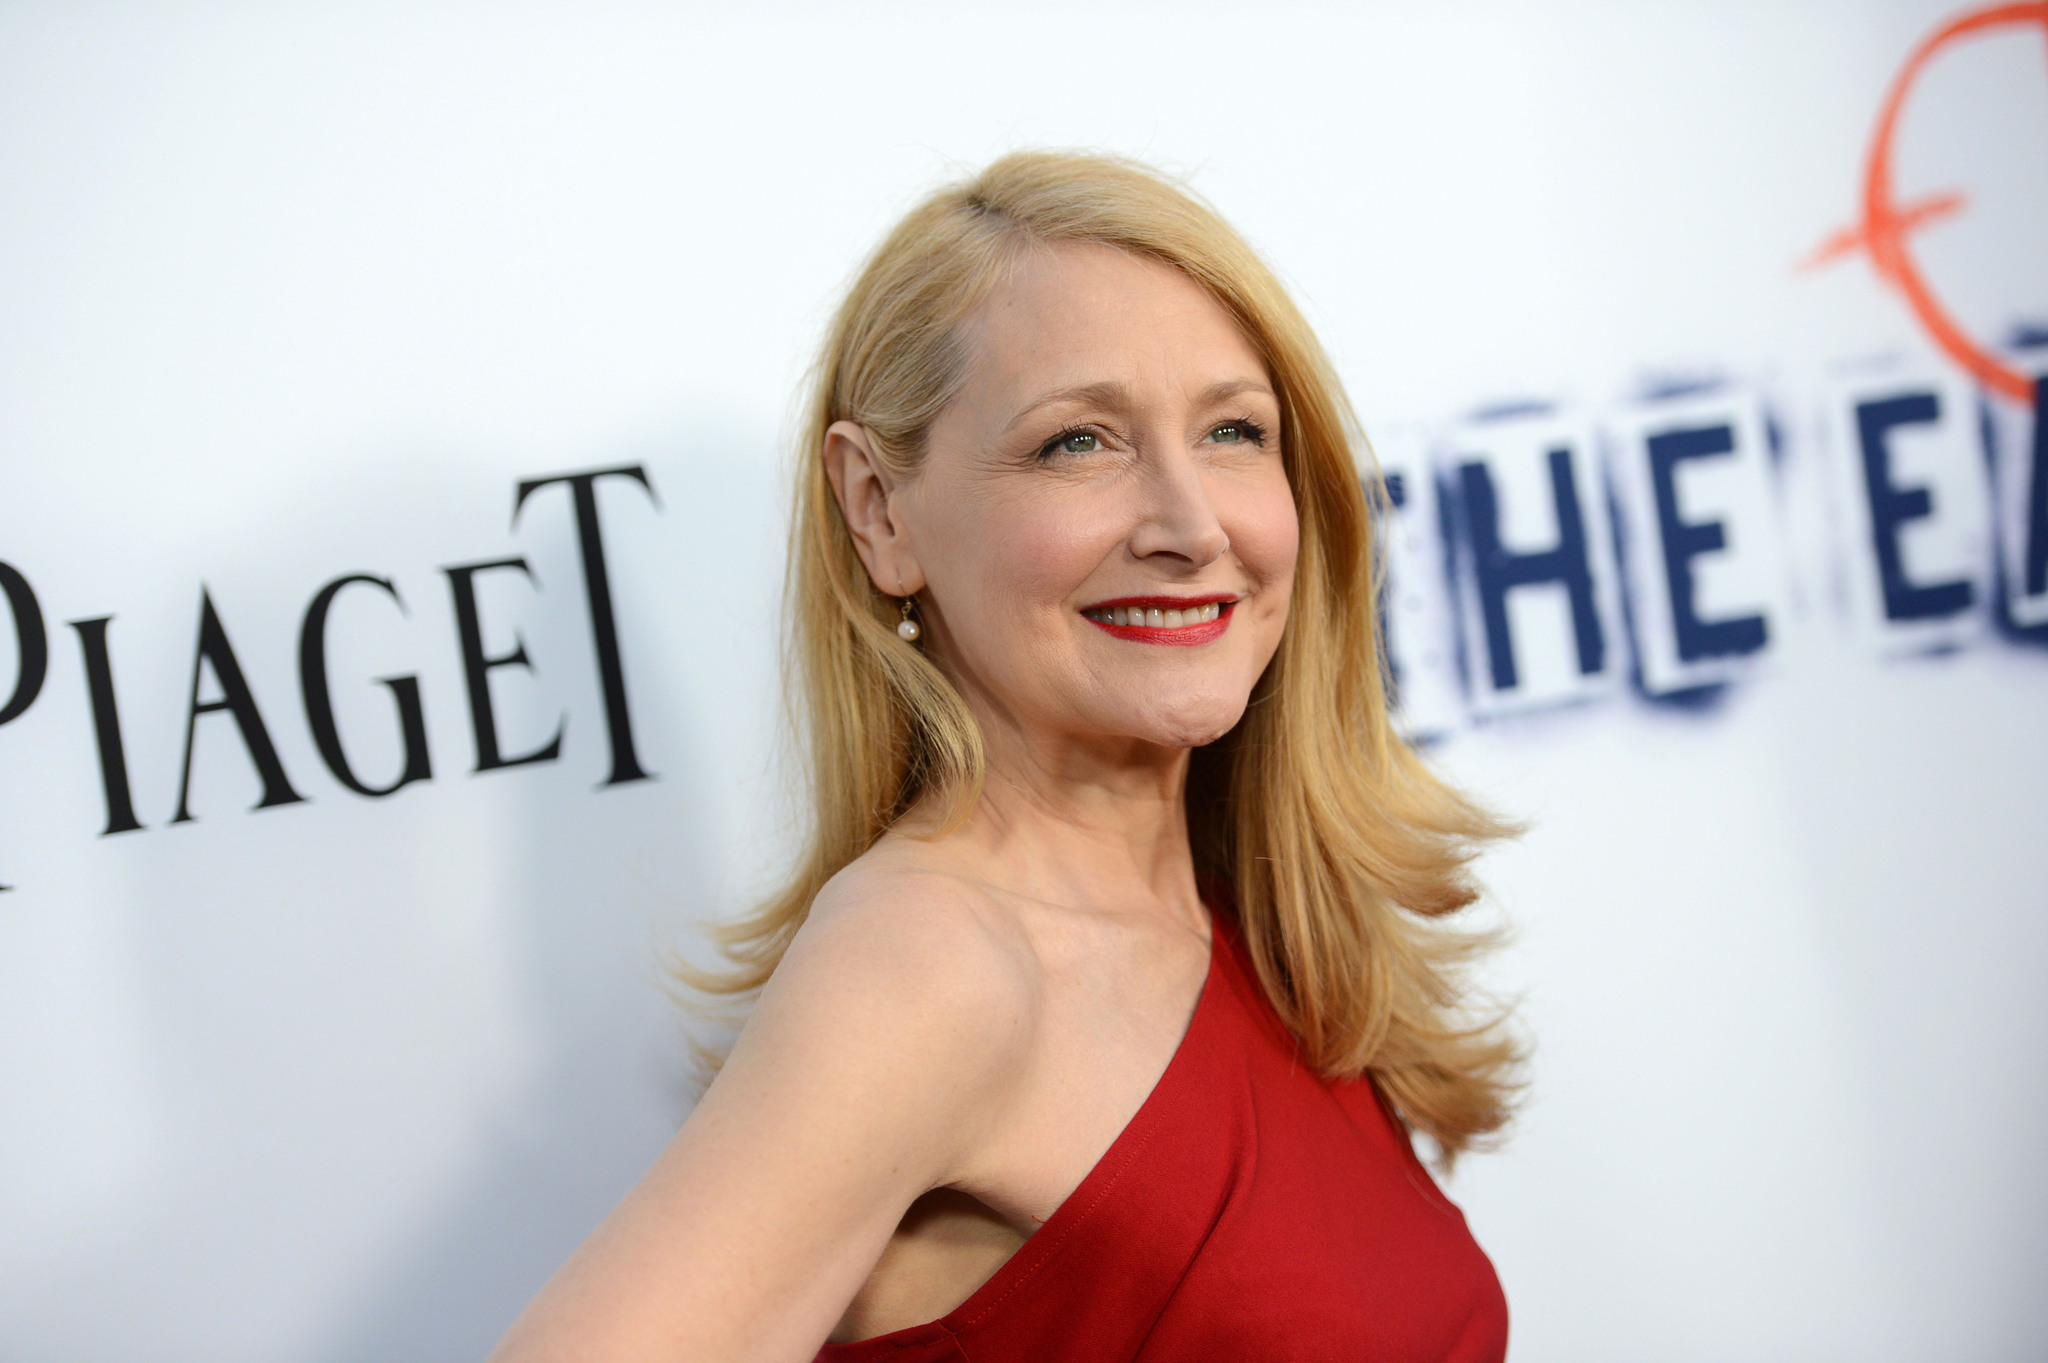 Patricia Clarkson at event of The East (2013)